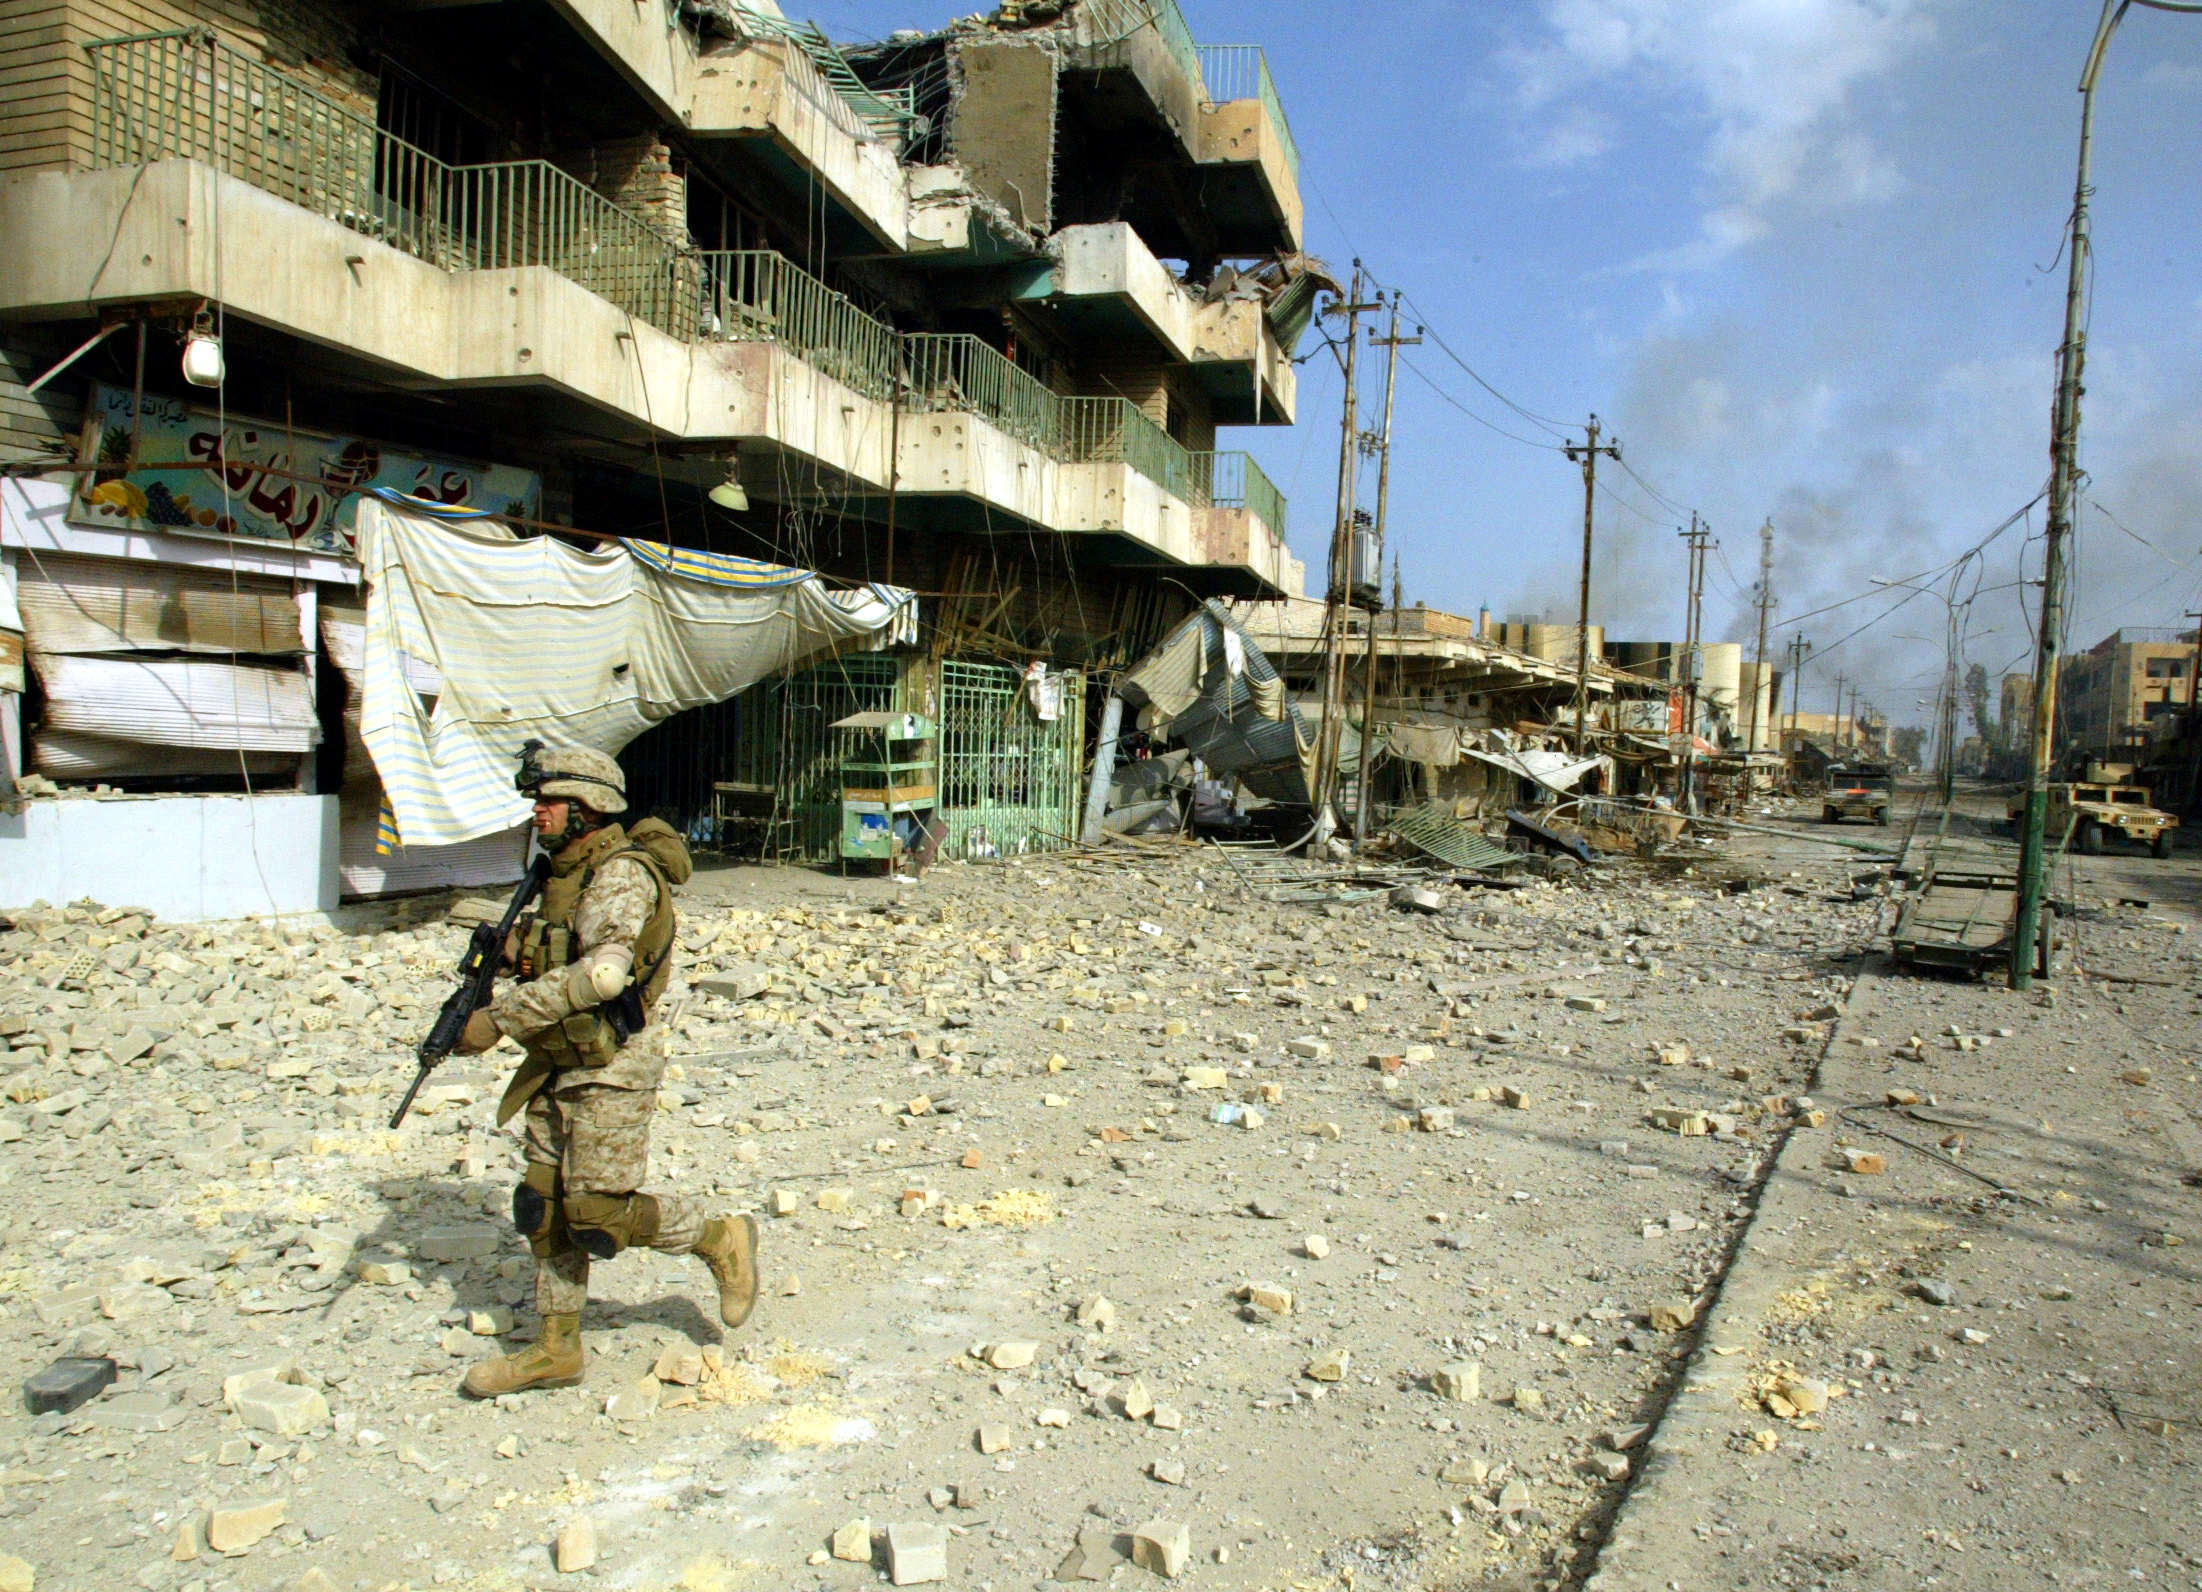 A US marine from the 3/5 Lima company walks towards a destroyed building along the main street in the restive city of Fallujah in 2004